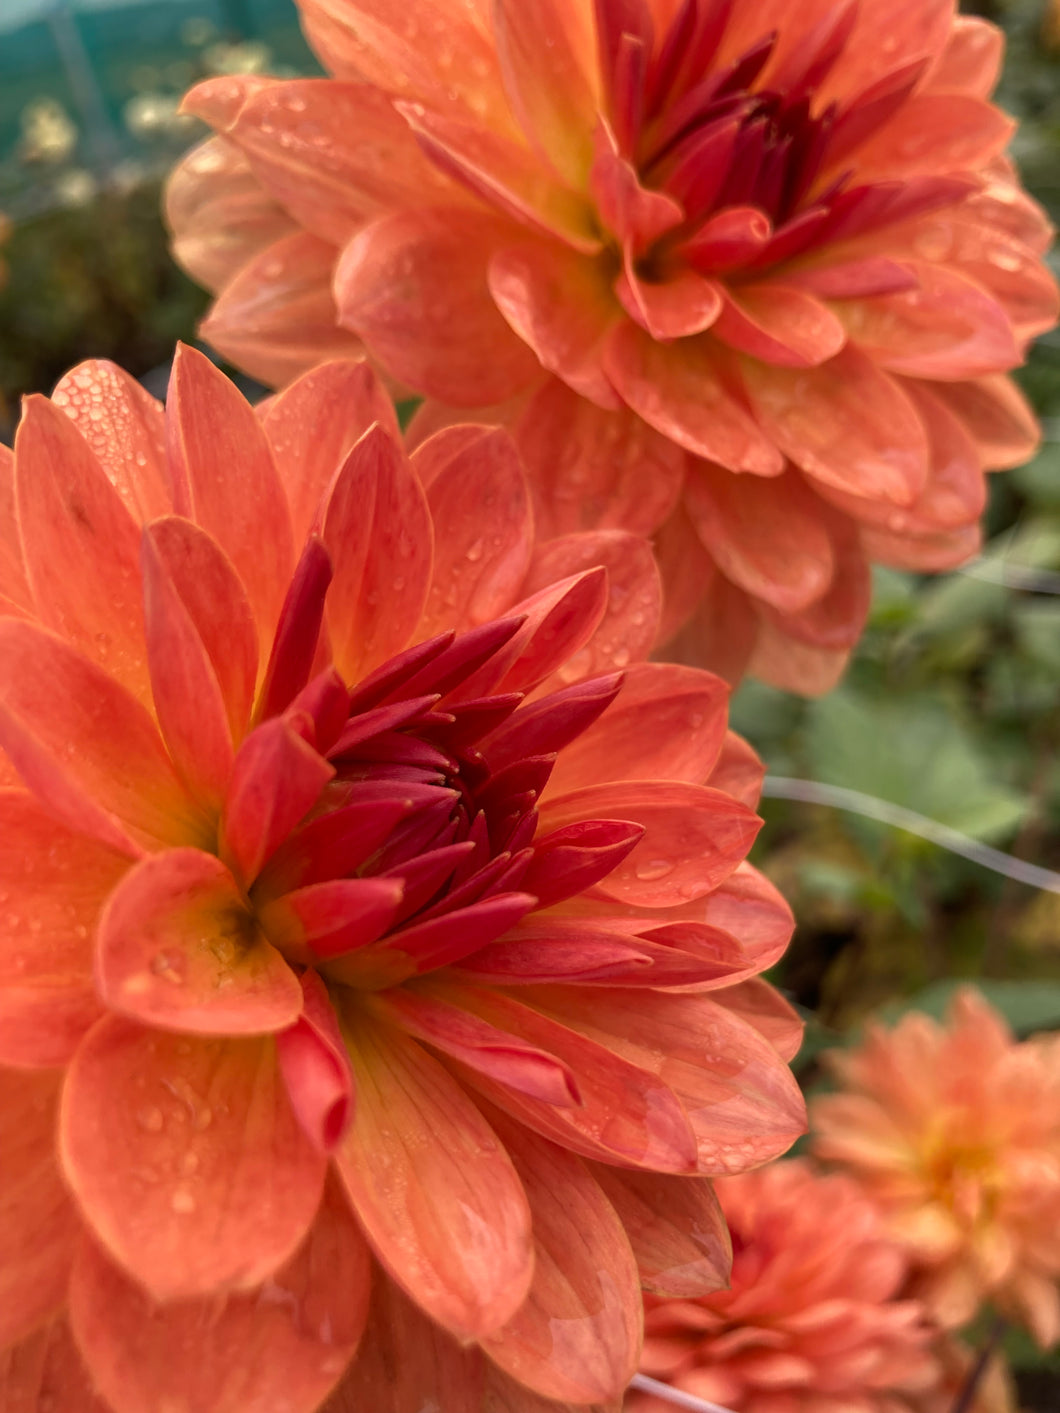 5 tubers of orange giant-flowered Dahlia (Dr. P. H. Riedell) Includes Postage